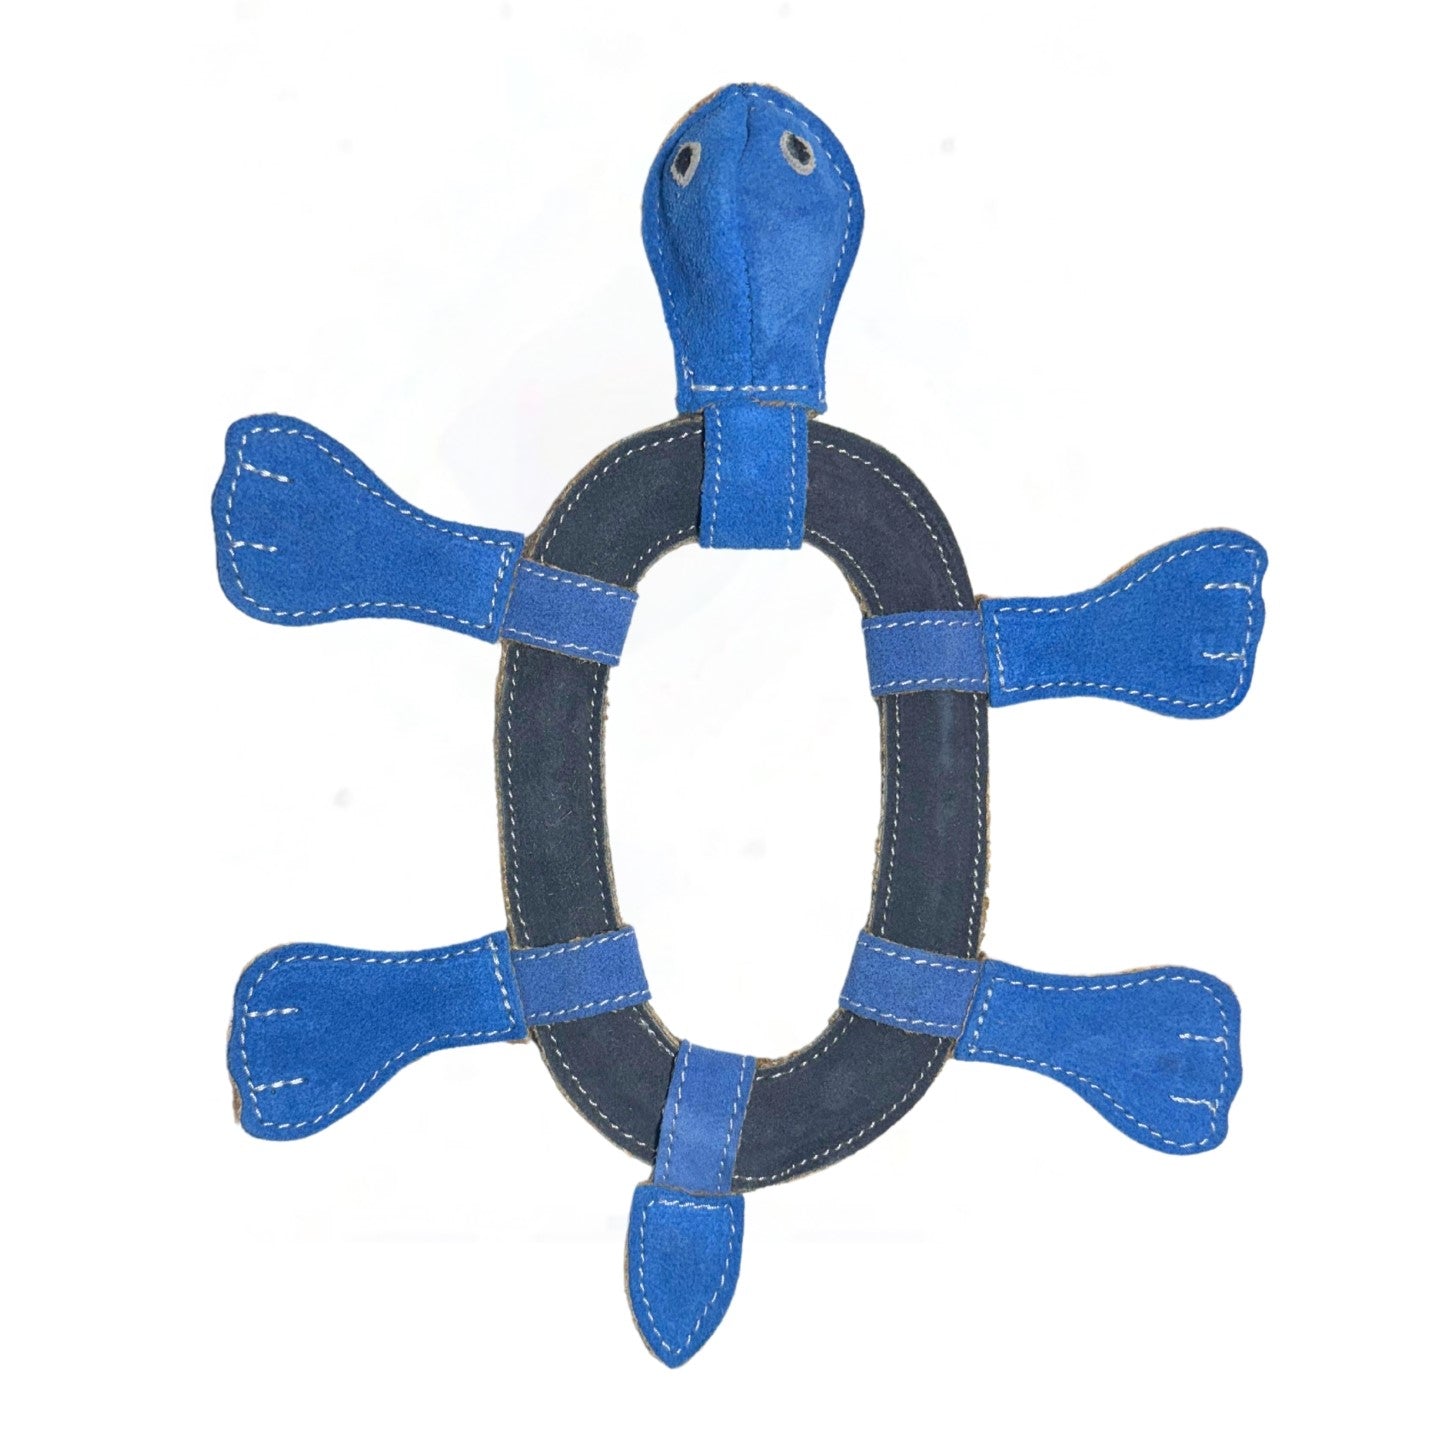 A handmade Thomas the Turtle - blue & navy buffalo suede puppy toy with a circular body designed for pet play, featuring stitched detailing and a flat silhouette for easy gripping by Georgie Paws.